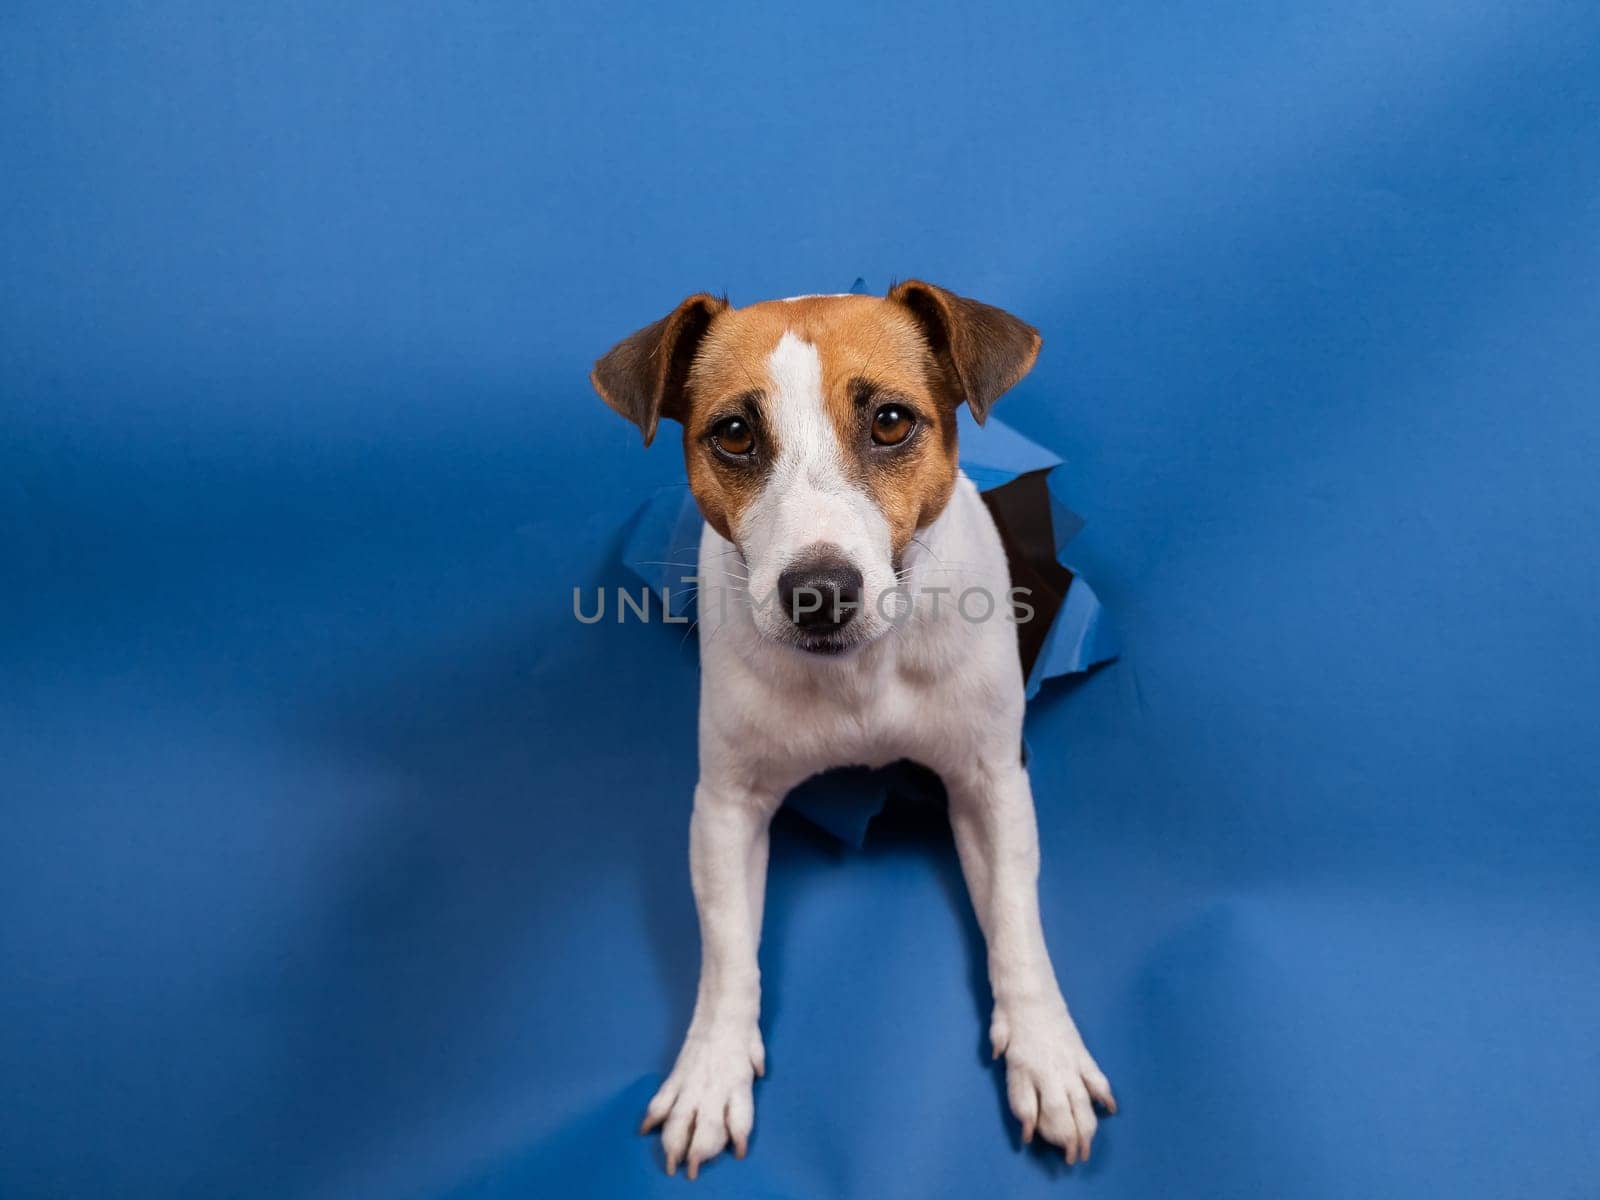 Funny dog jack russell terrier climbs out of a paper blue background breaking a hole in it. by mrwed54